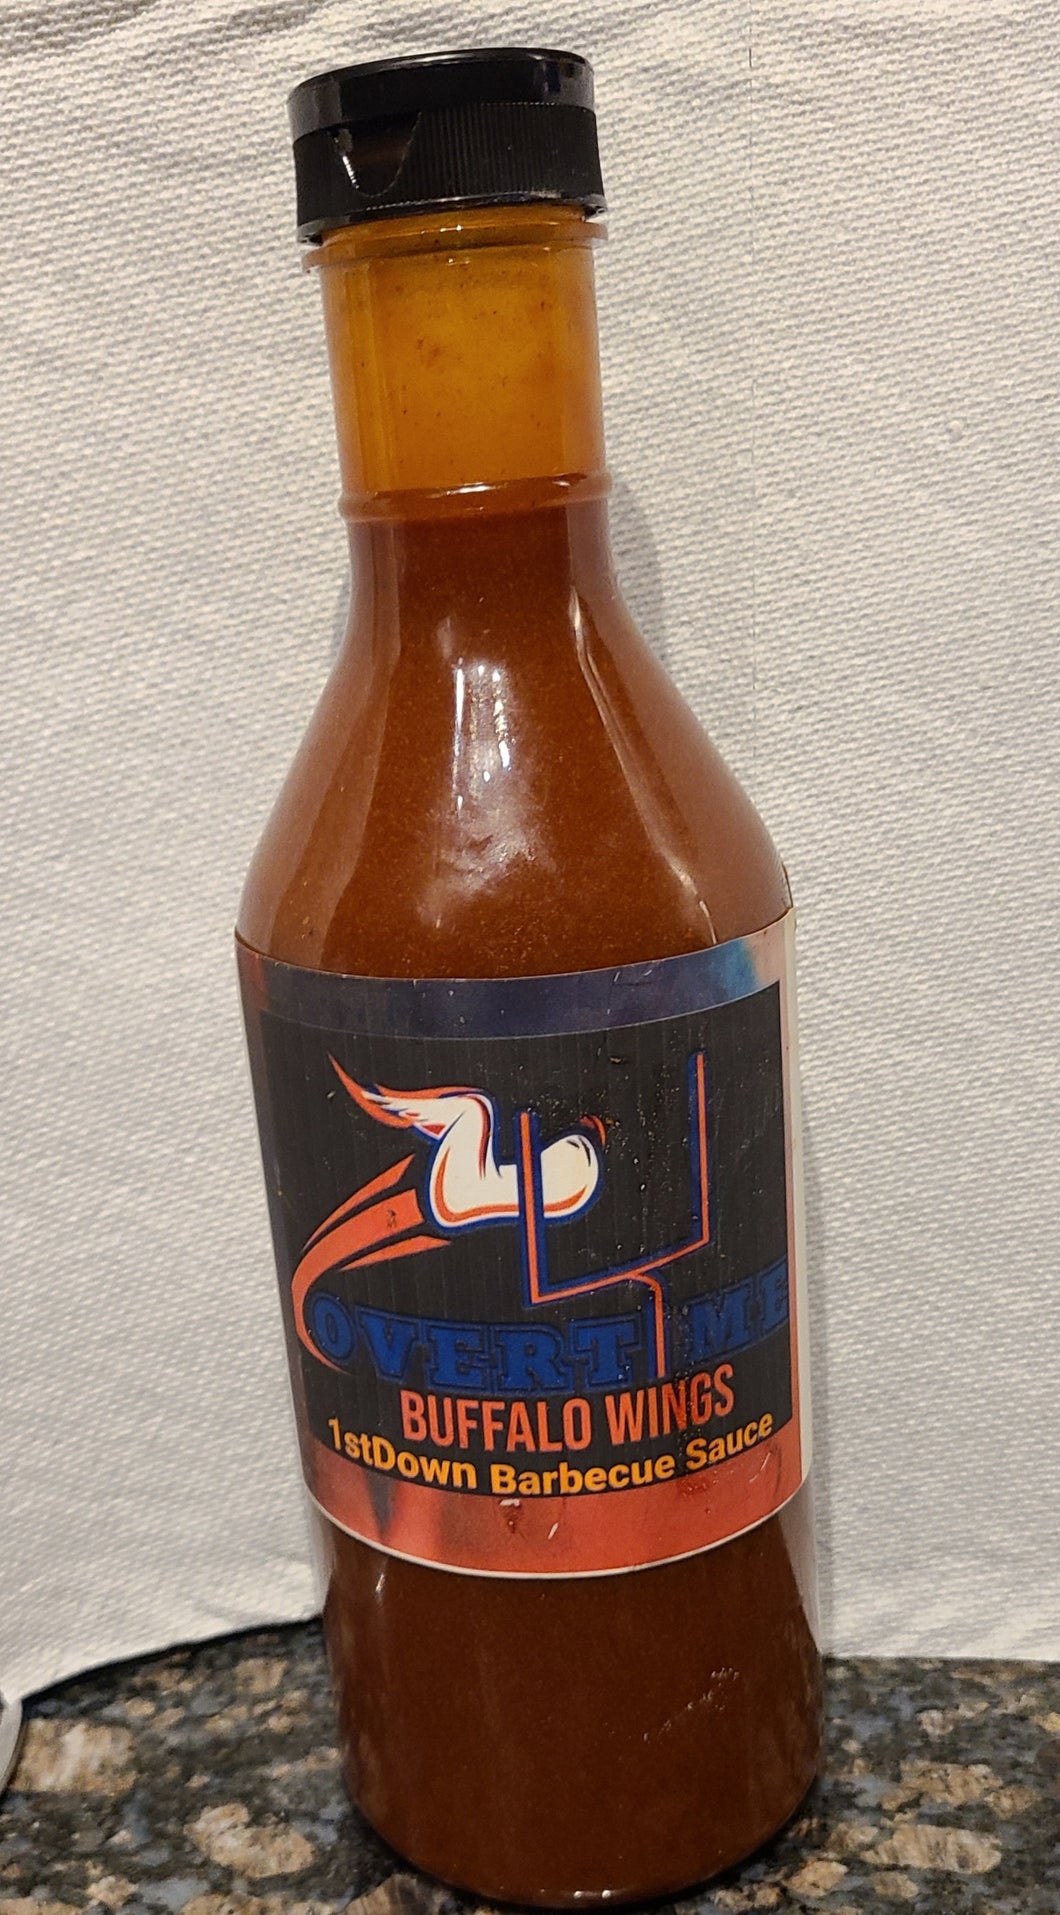 O.T.B.W. 1st Down Barbecue Sauce